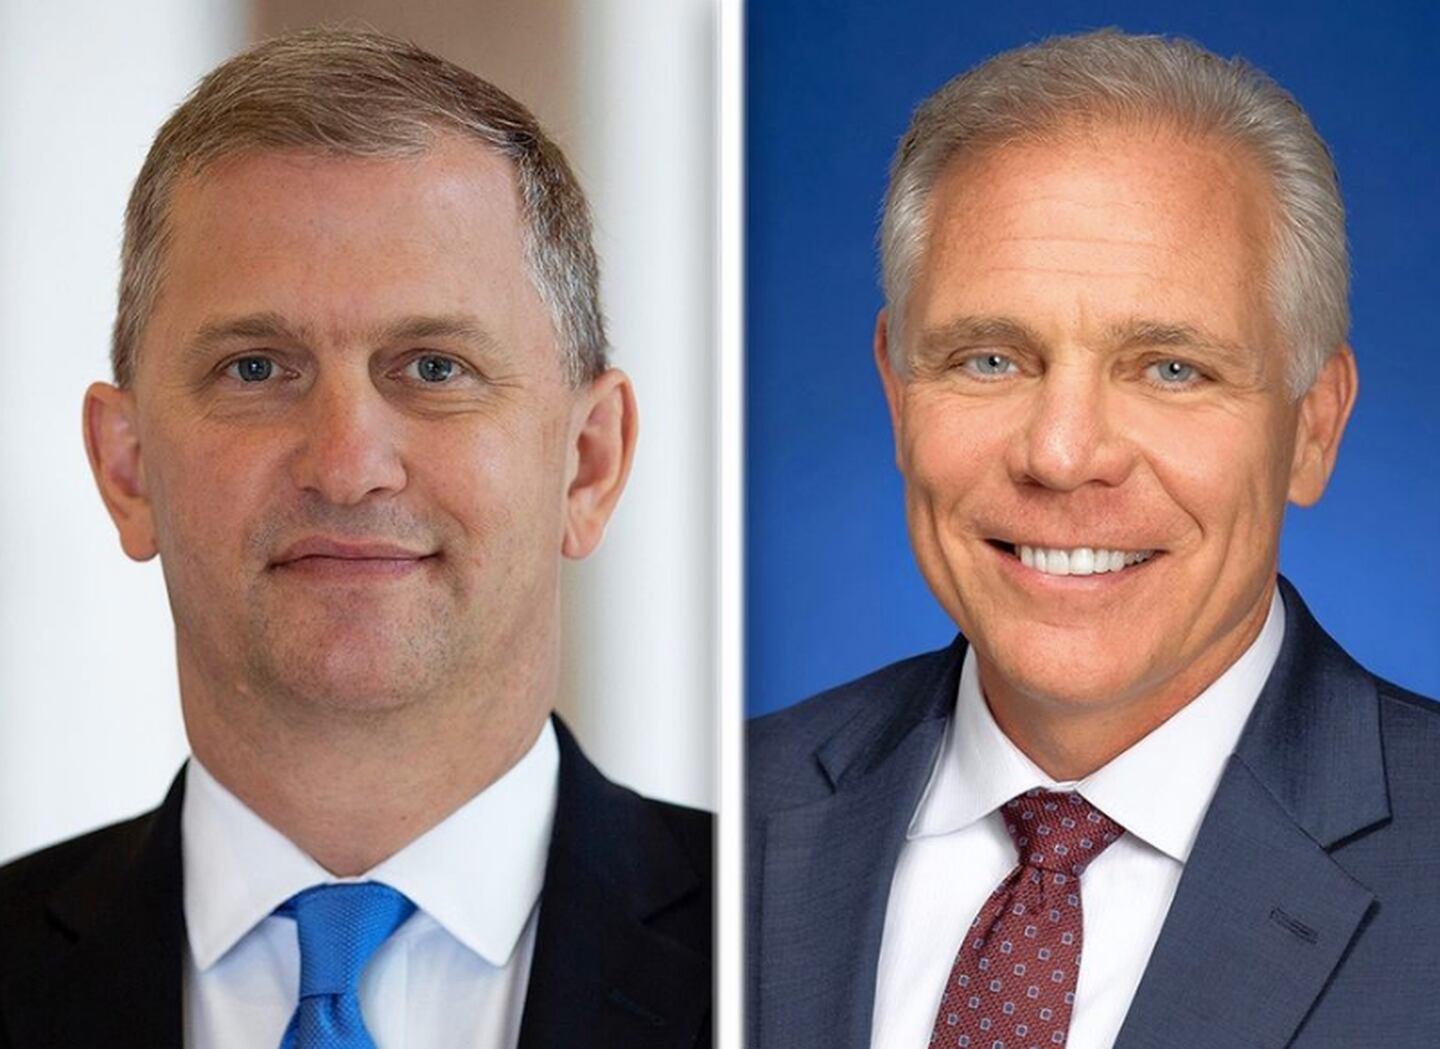 Democratic U.S. Rep. Sean Casten of Downers Grove, left, and Orland Park Republican Keith Pekau are candidates for the 6th Congressional District seat in November.